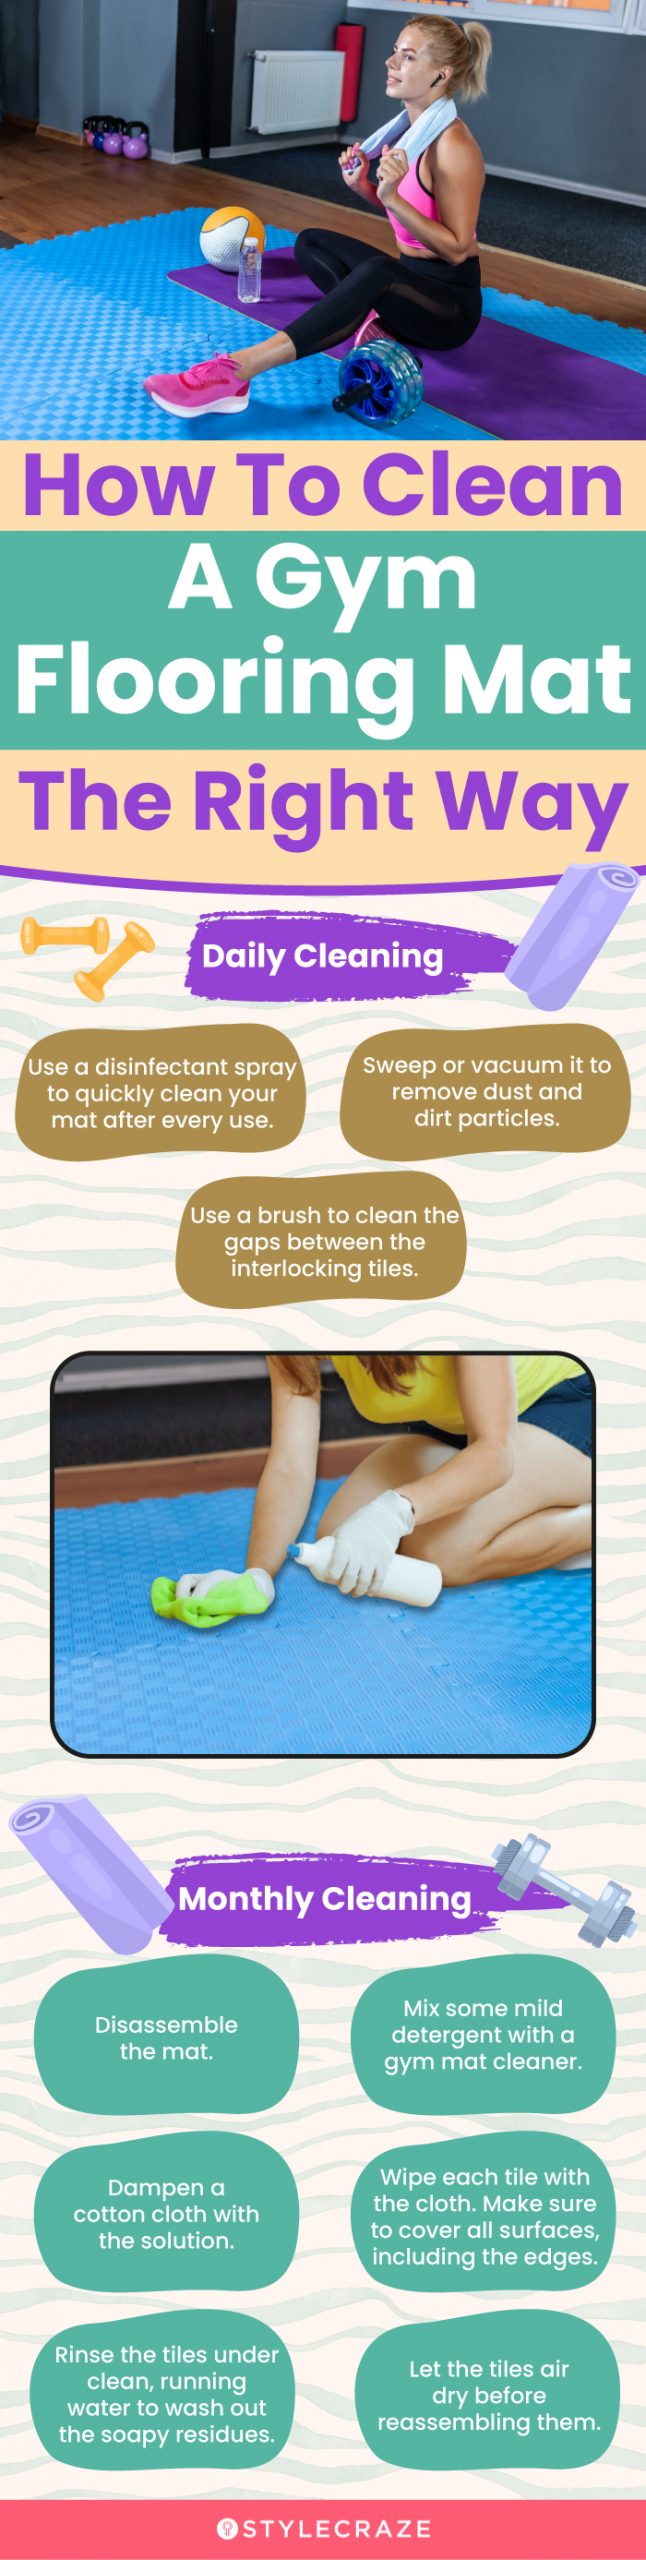 How To Clean A Gym Flooring Mat The Right Way (infographic)